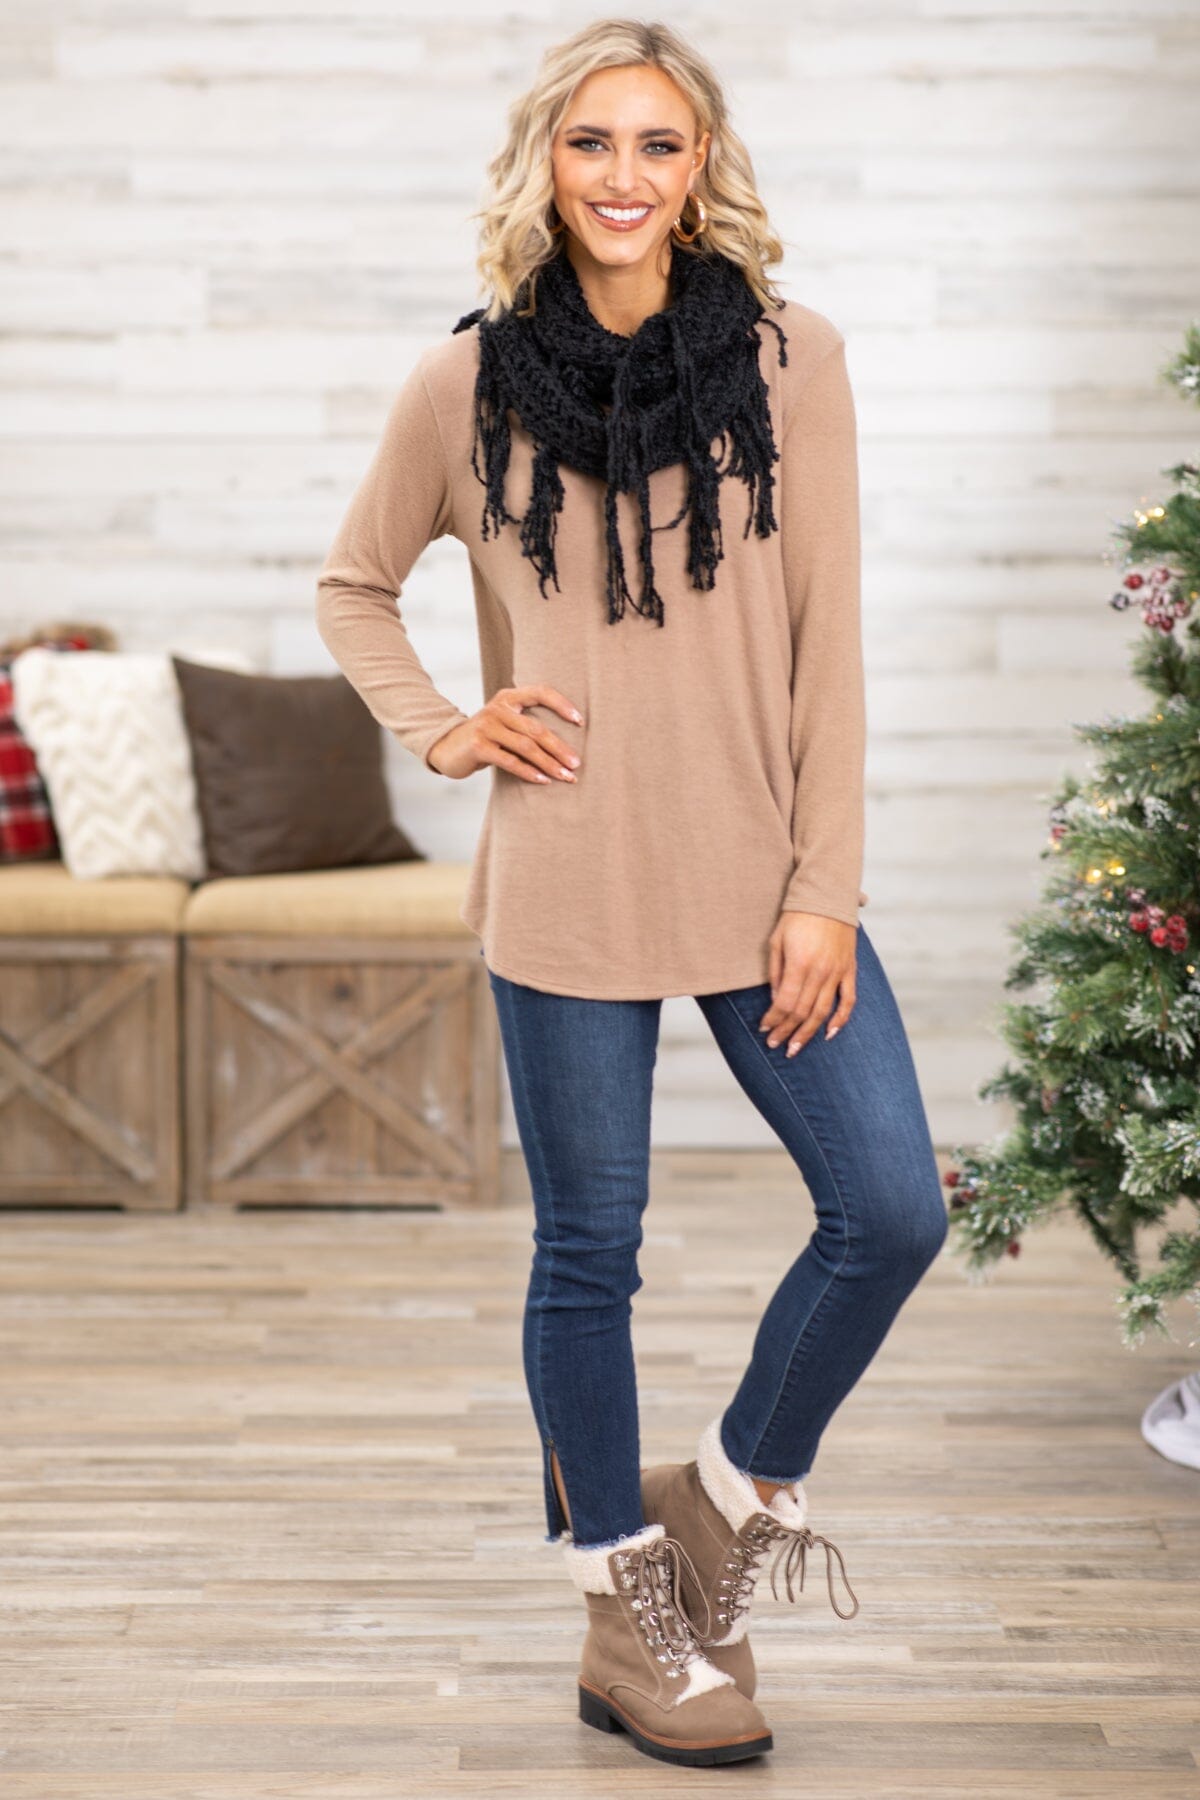 Taupe Top and Black Infinity Scarf Bundle - Filly Flair